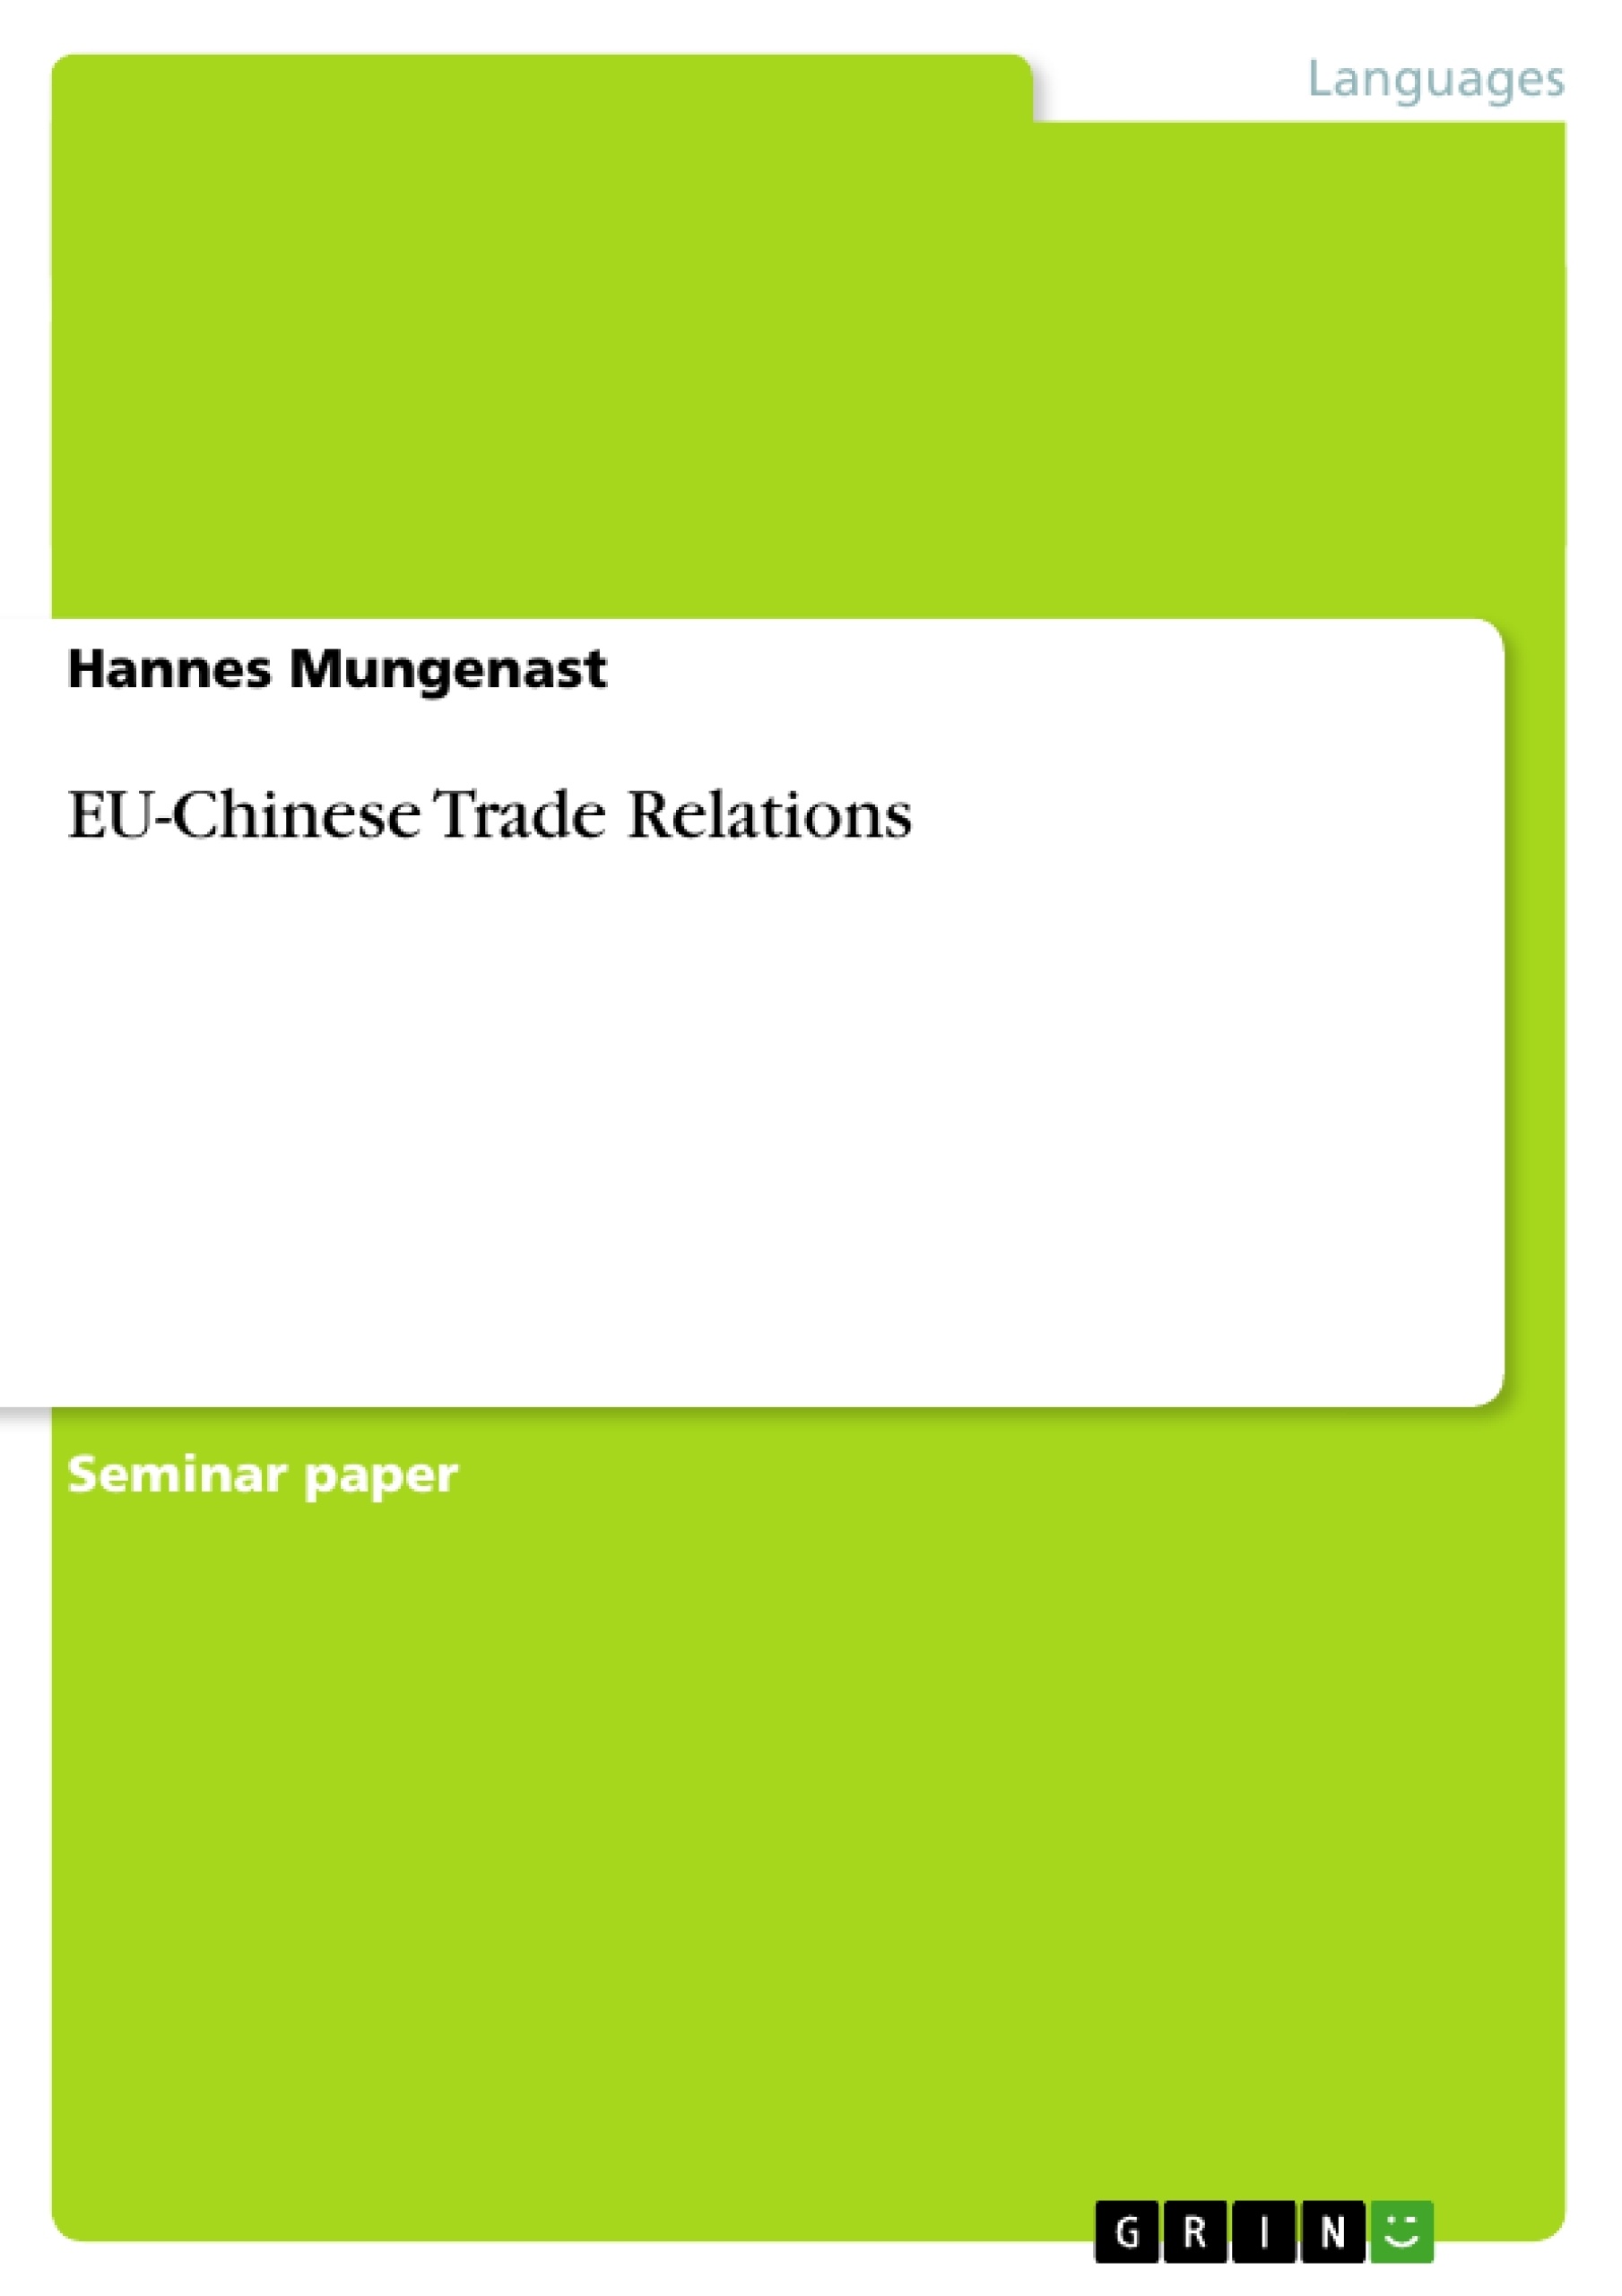 Title: EU-Chinese Trade Relations